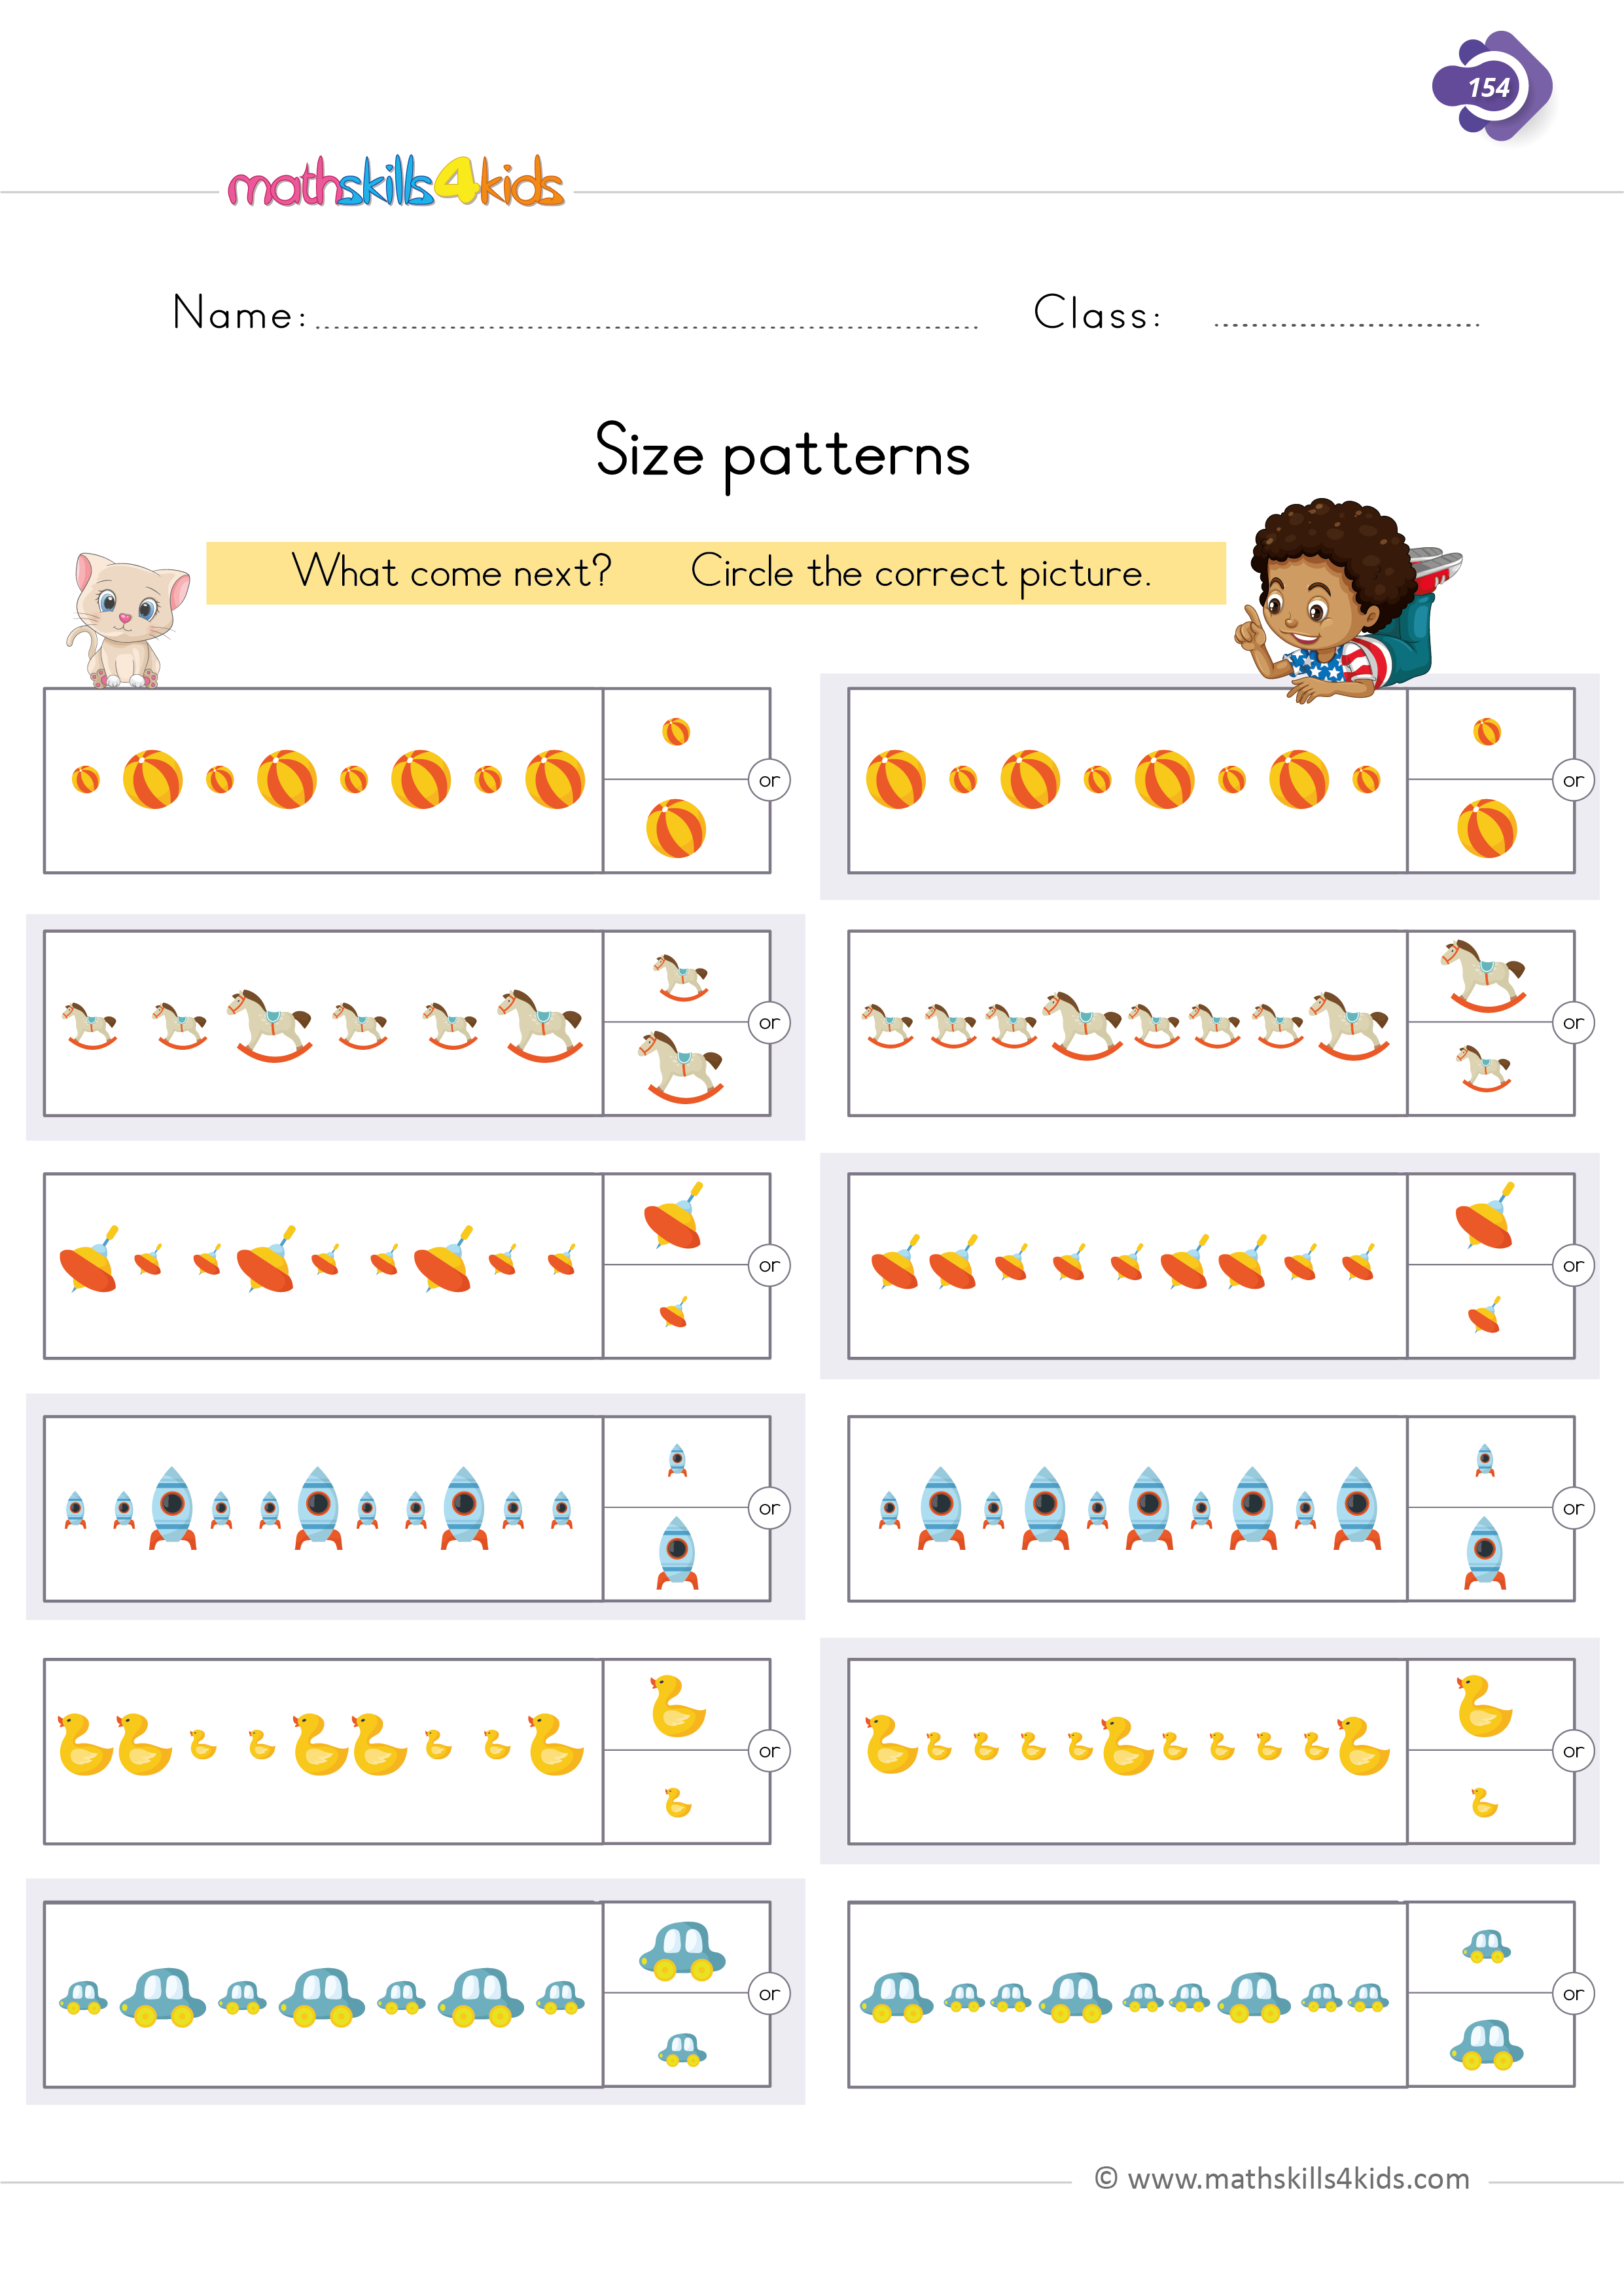 1st Grade free printable pattern worksheets: Fun & engaging activities - identifying what come next in the size pattern?